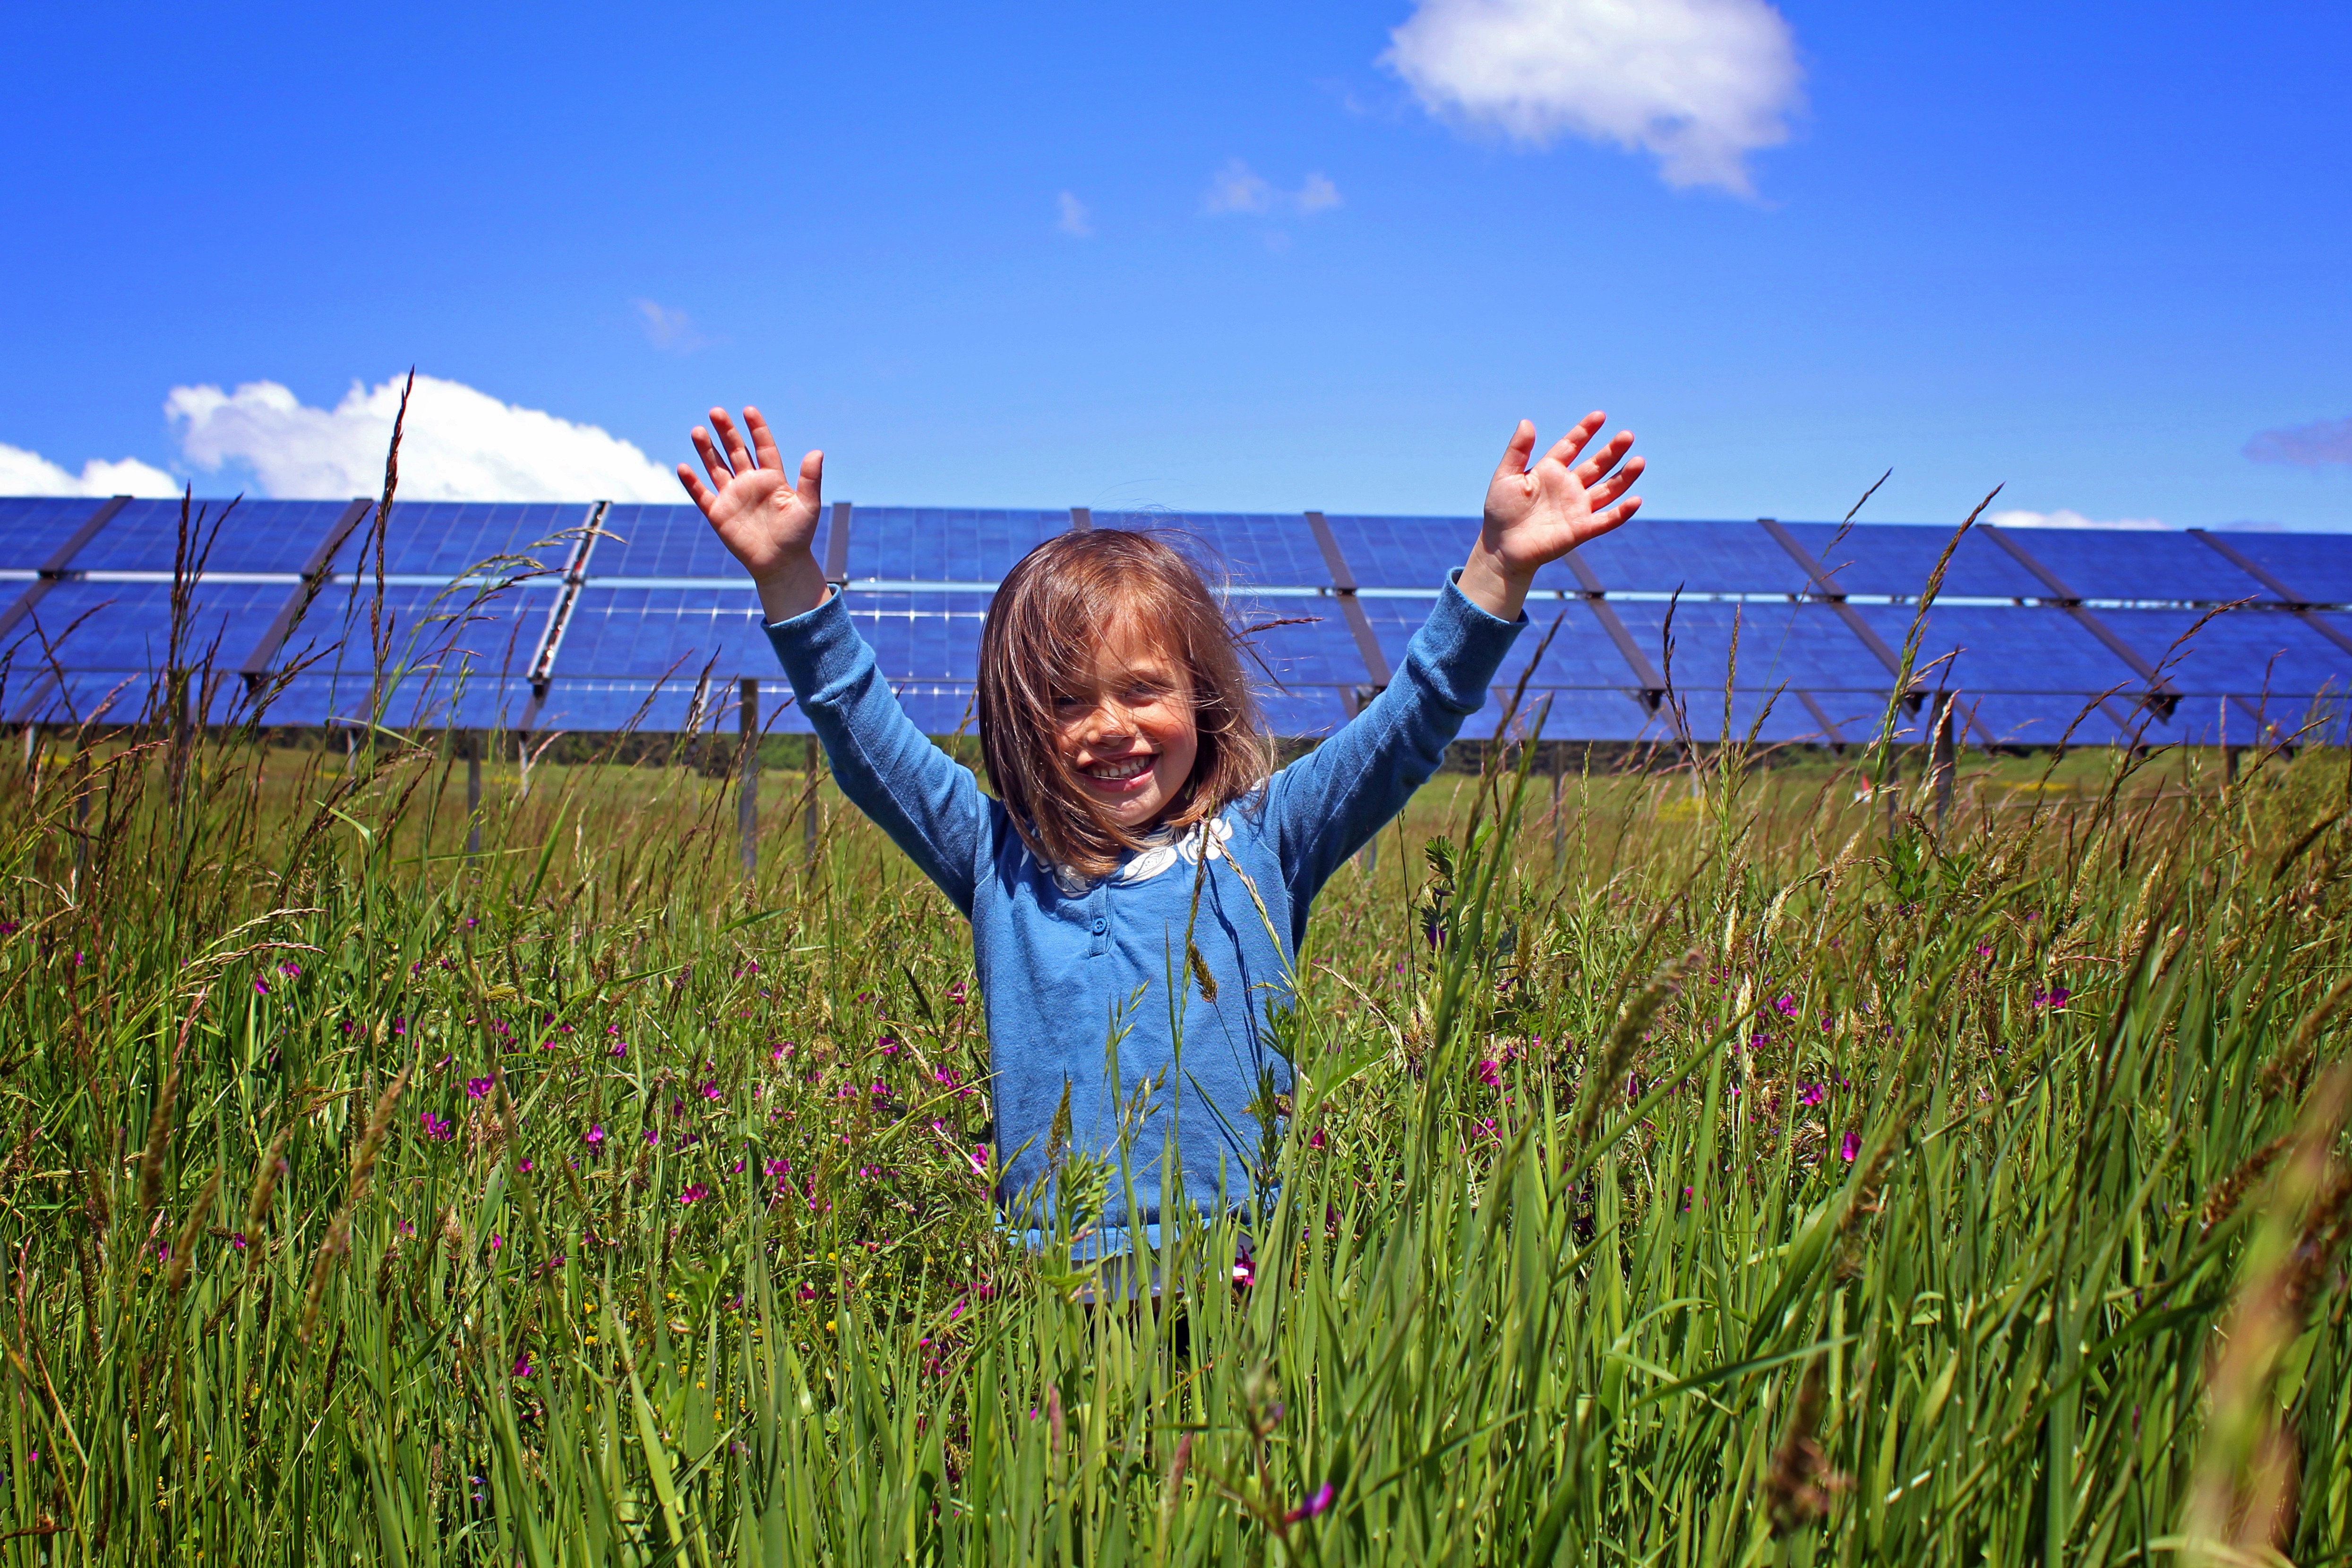 Happy young child wearing a blue shirt, in field with solar panels in the background